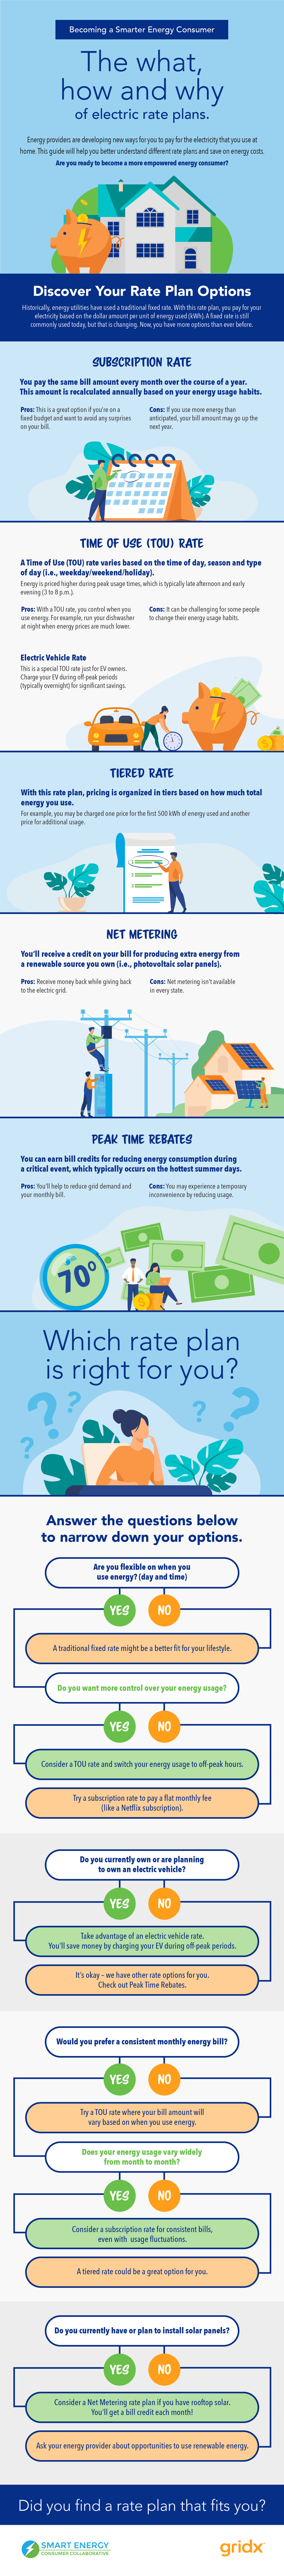 The What, How, and Why of Electric Rate Plans infographic will help guide you through what consumers might commonly find offered by the electricity provider